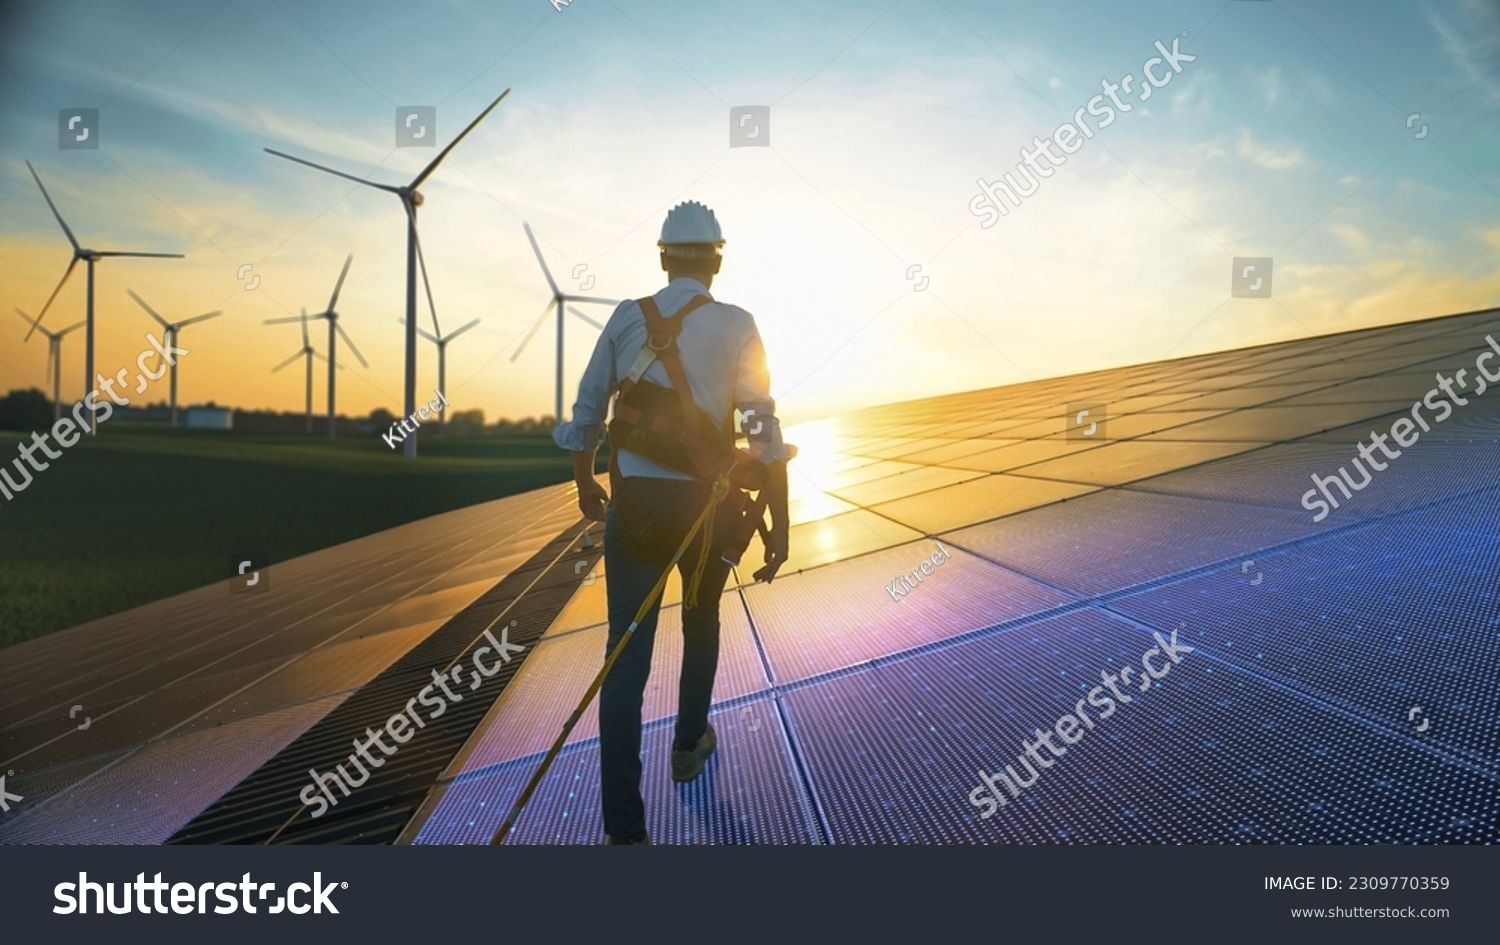 Professional Male Green Energy Engineer Walking On Solar Panel, Wearing Safety Belt And Hard Hat. Man Inspecting Sustainable Energy Farm With Wind Turbines. VFX Edit Visualizing Electricity Flow. #2309770359